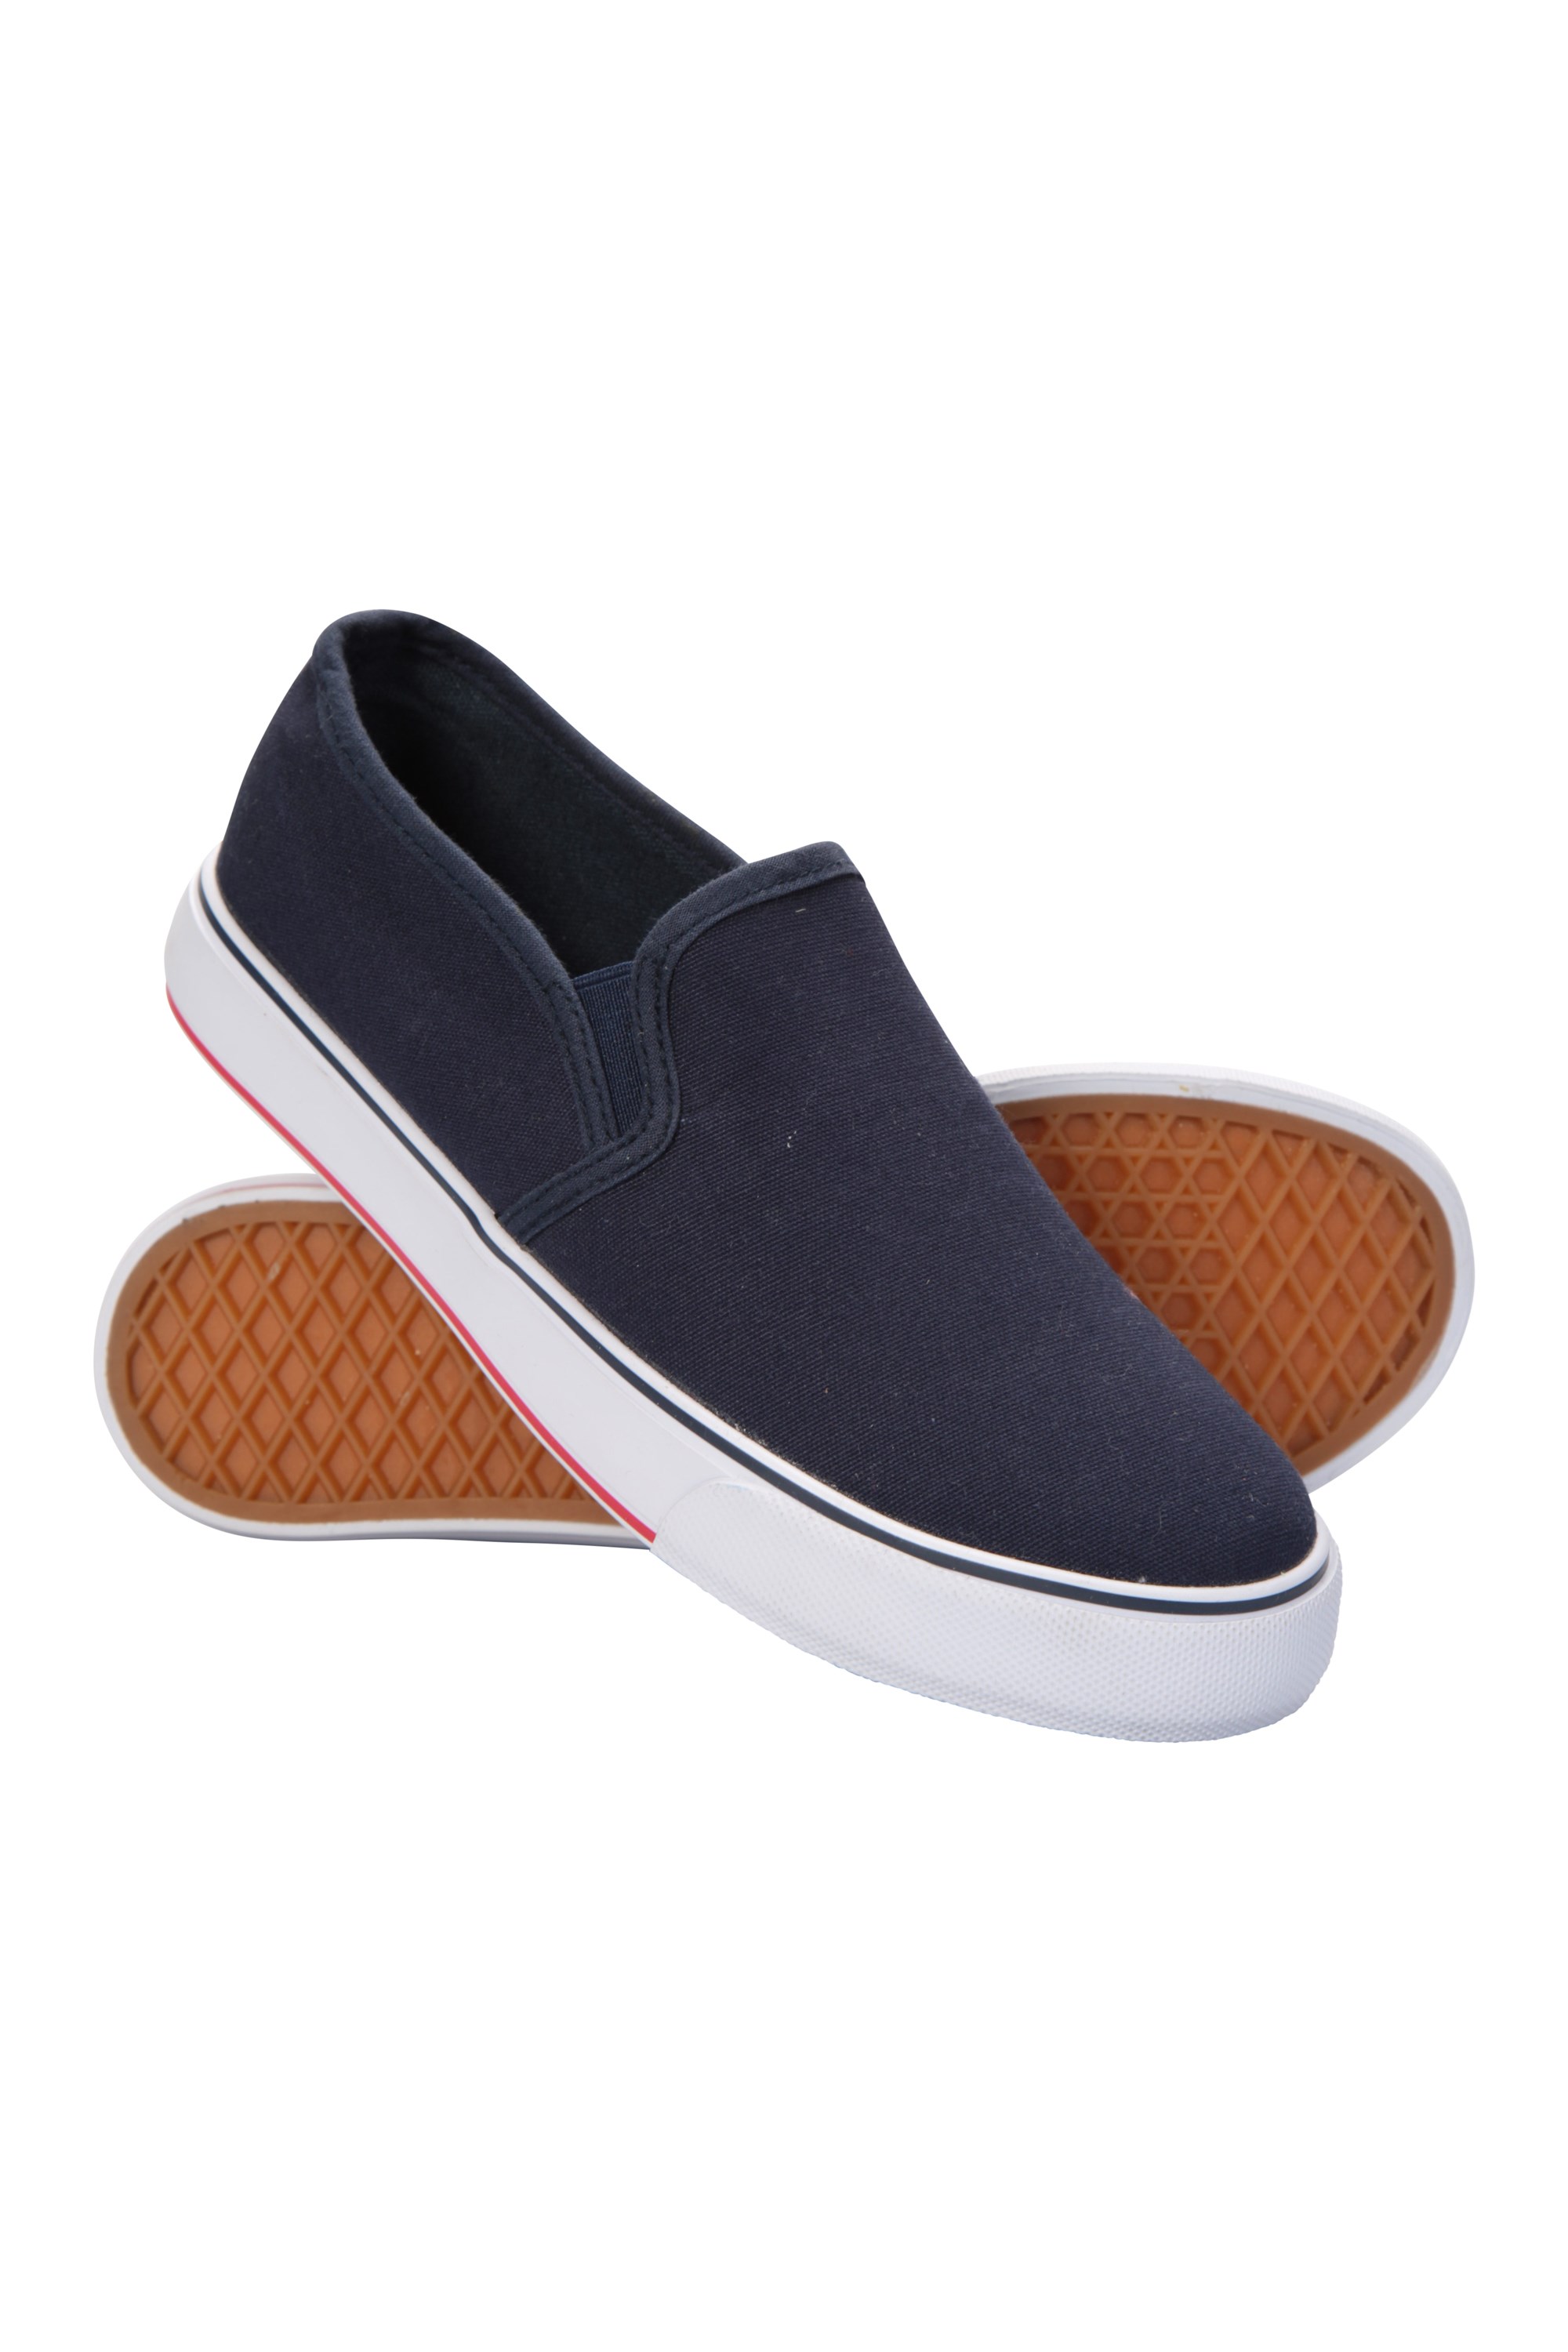 Canvas Slip-On Kids Shoes | Mountain Warehouse GB